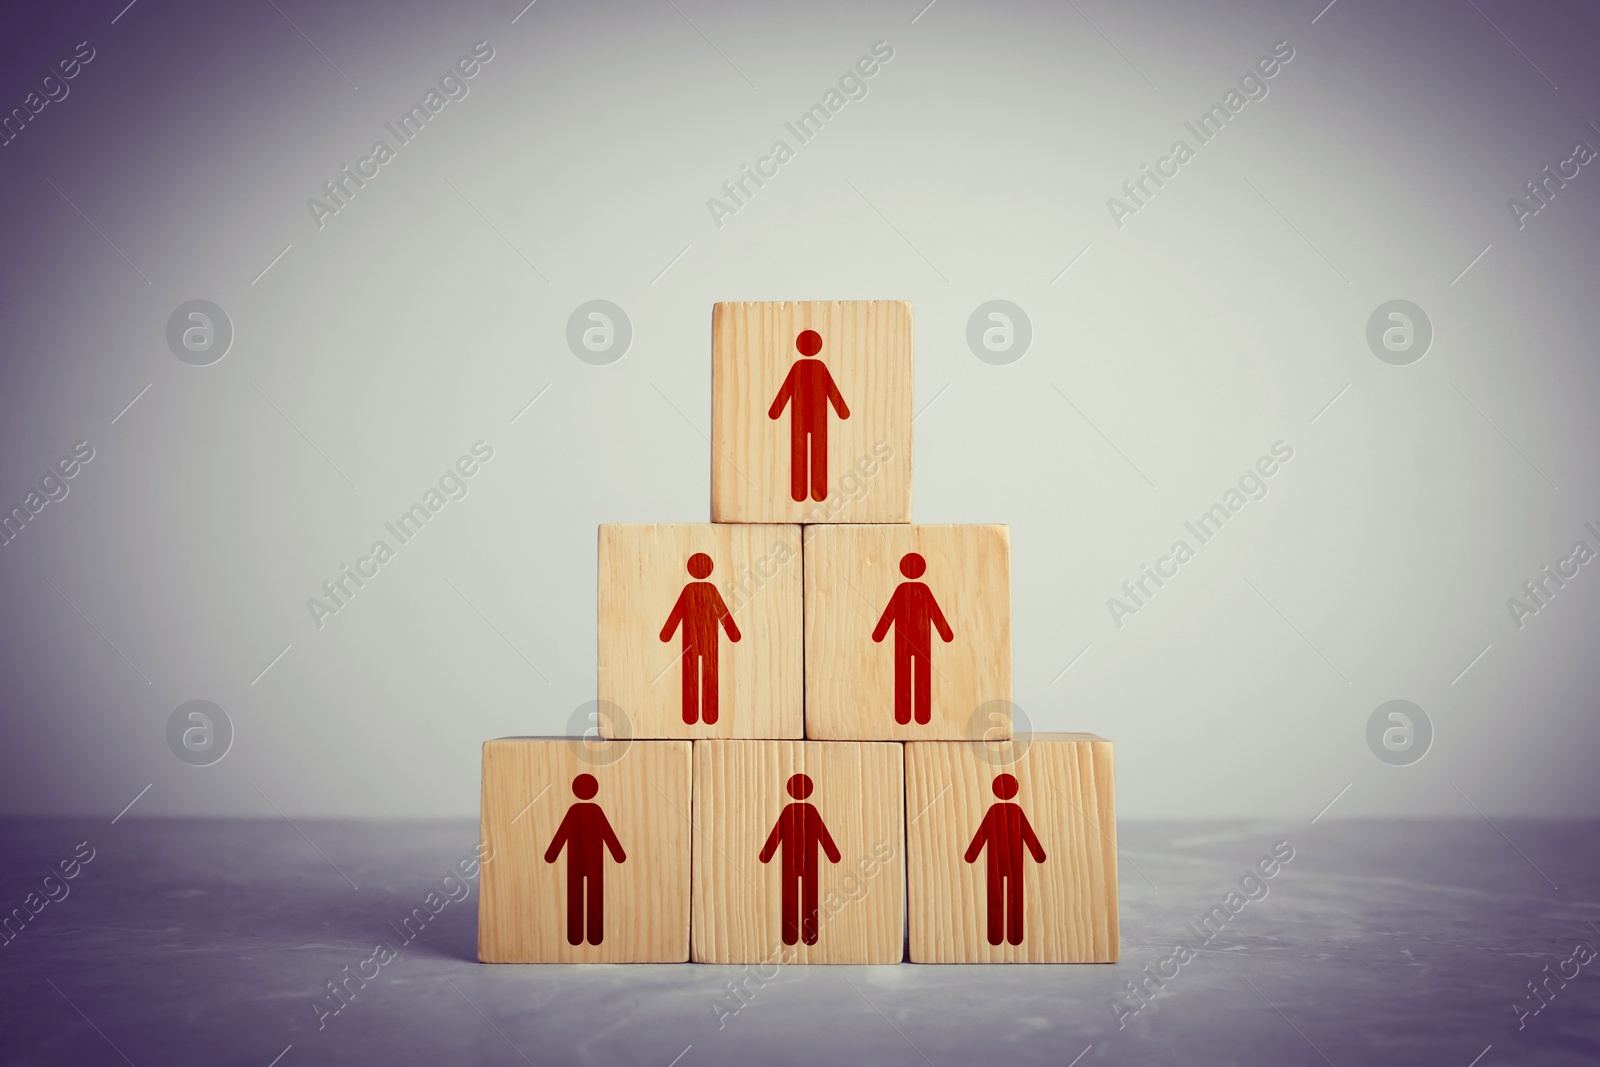 Image of Team and management concept. Pyramid of wooden cubes with human icons on table